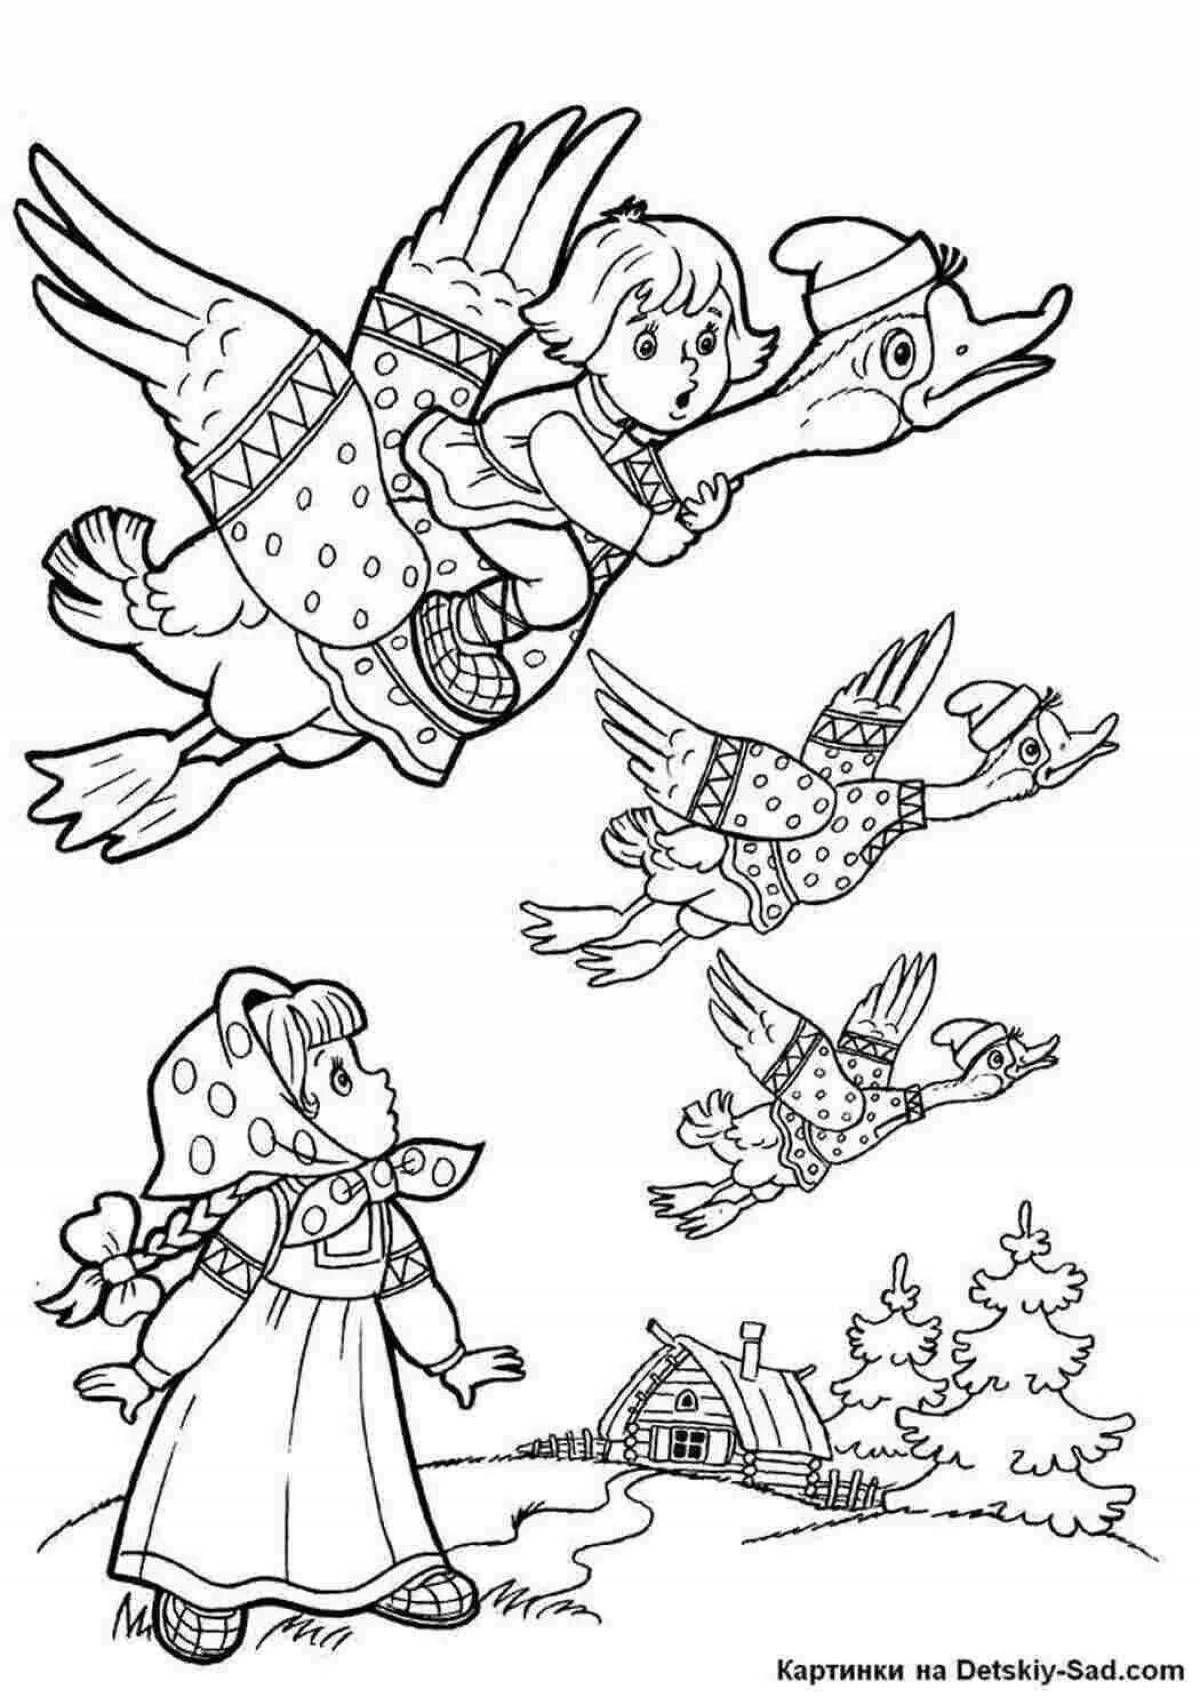 Playful coloring book based on Russian folk tales for preschoolers